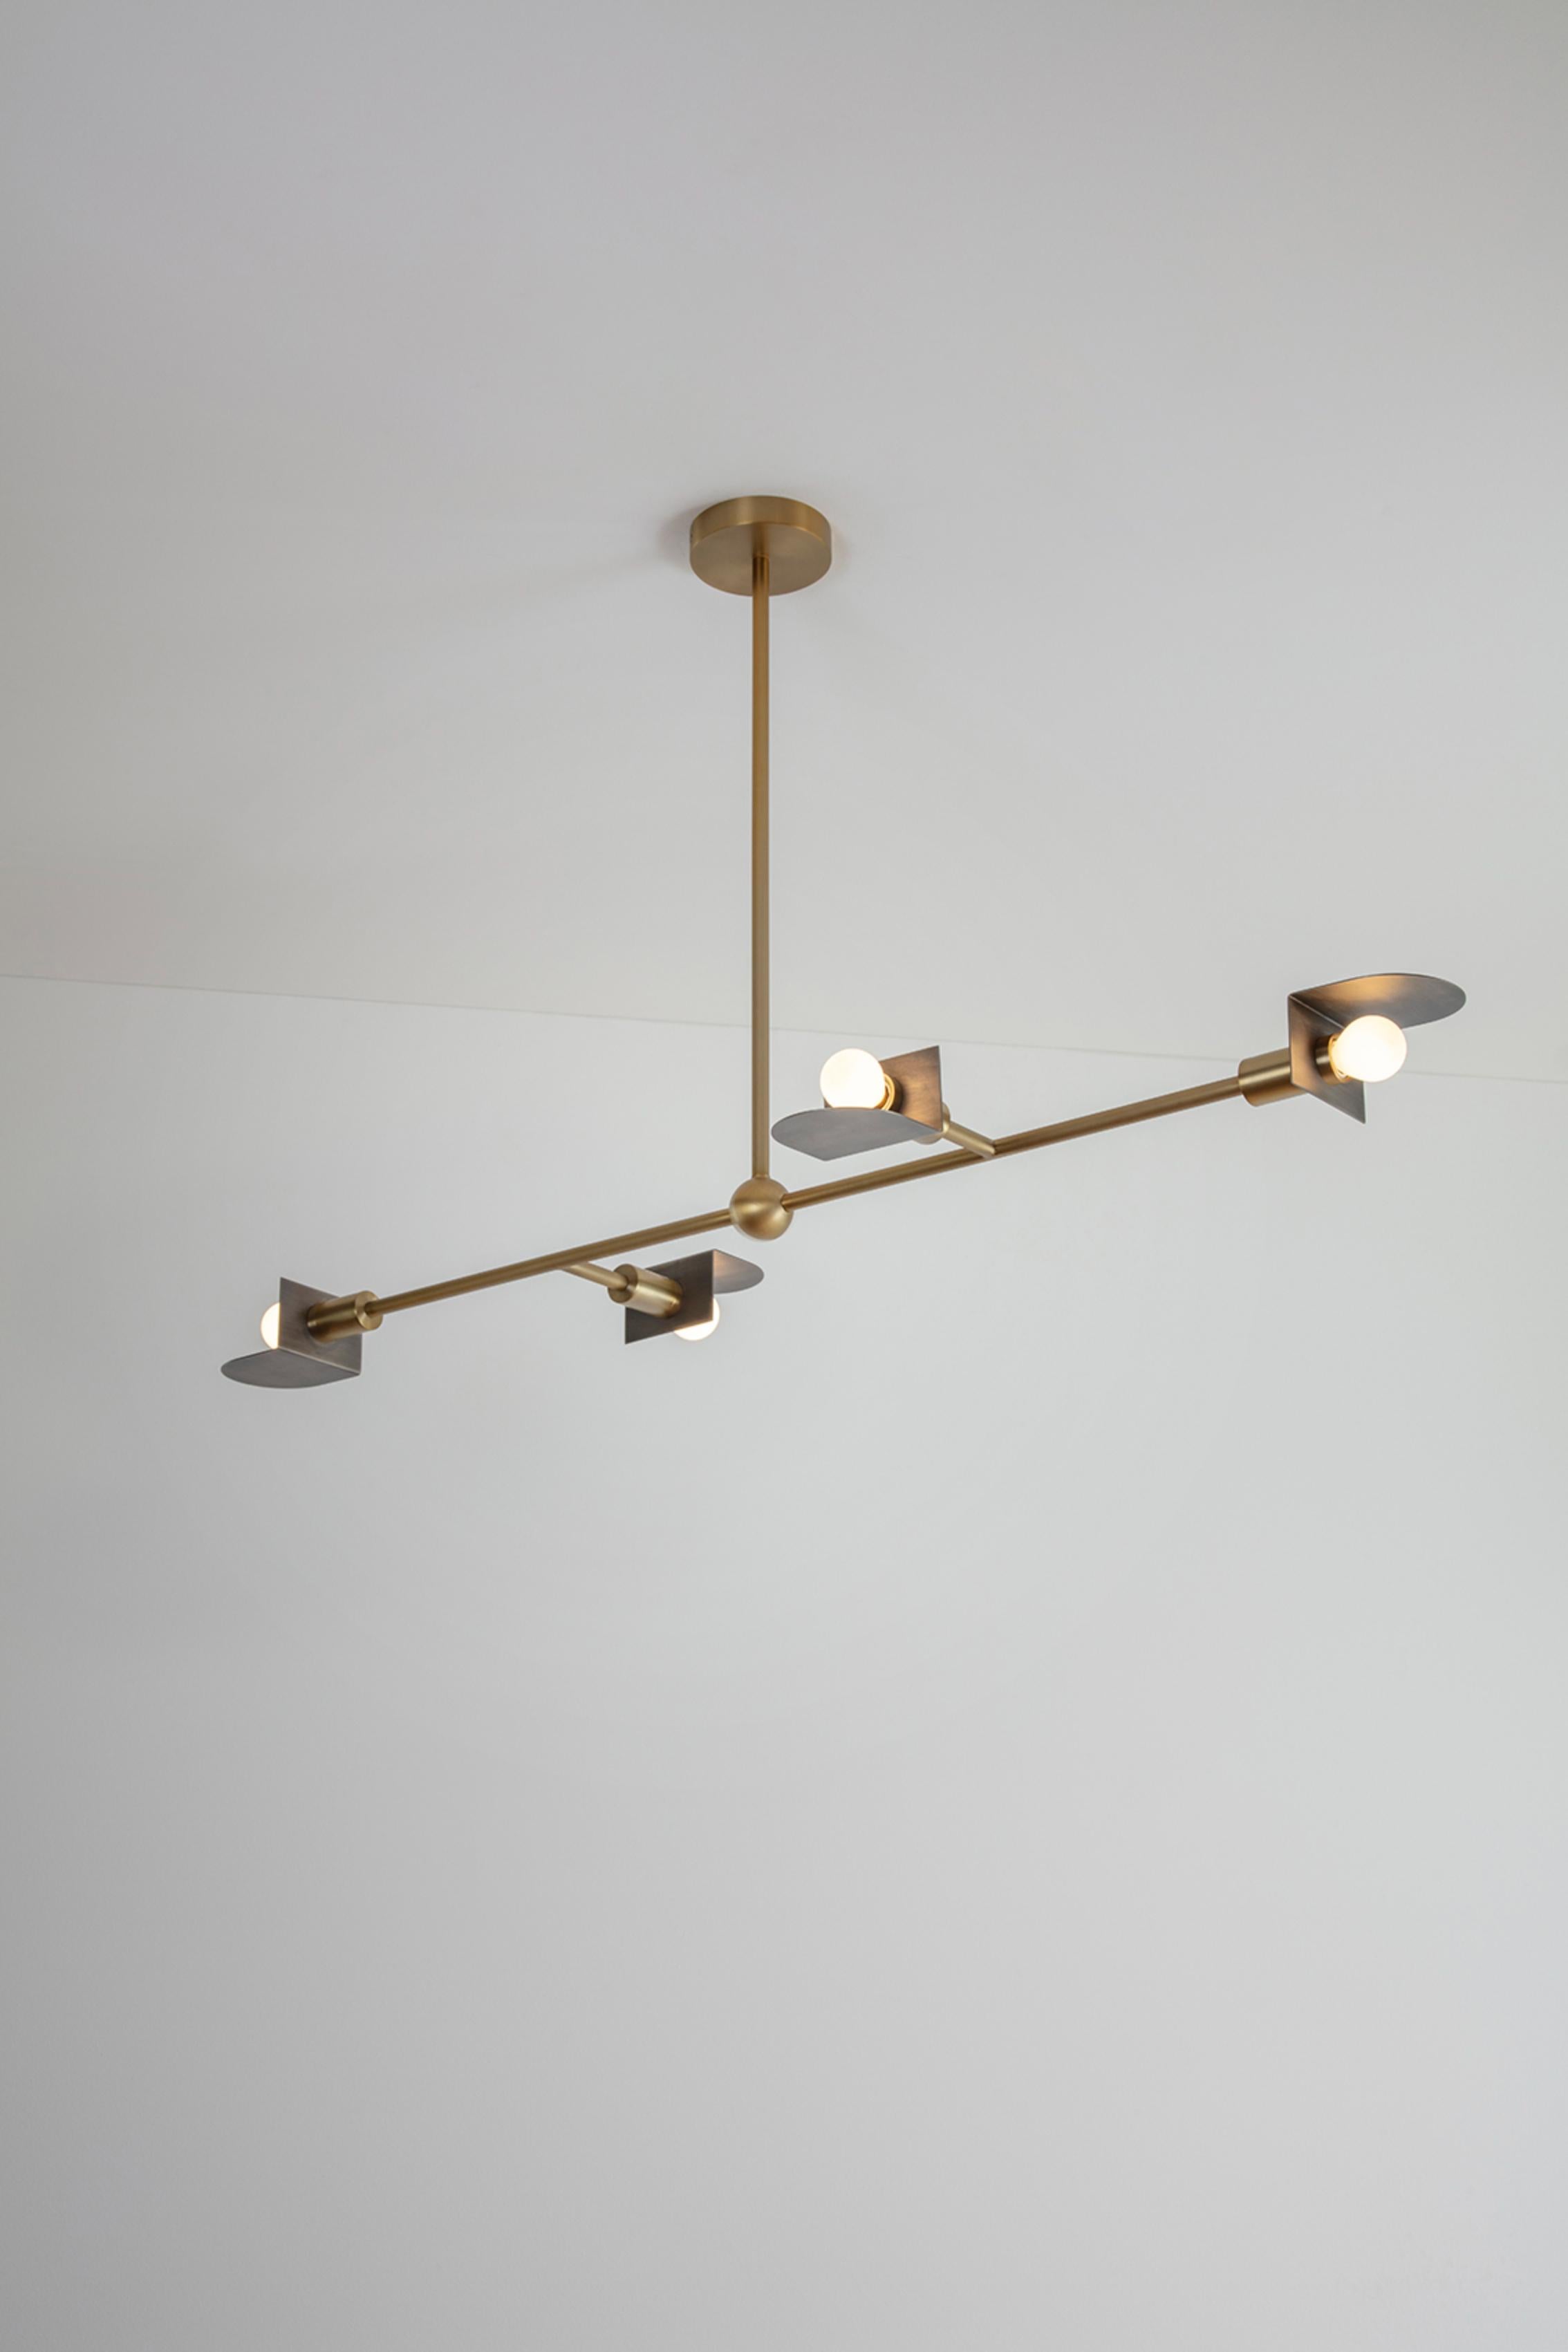 Route I Pendant Light by Square in Circle
Dimensions: D117 x W6 x H63 cm
Materials: Brushed brass/ brushed grey metal
Other finishes available.

An ambitious linear pendant displaying geometric semicircular metal shades with returns. This four-armed